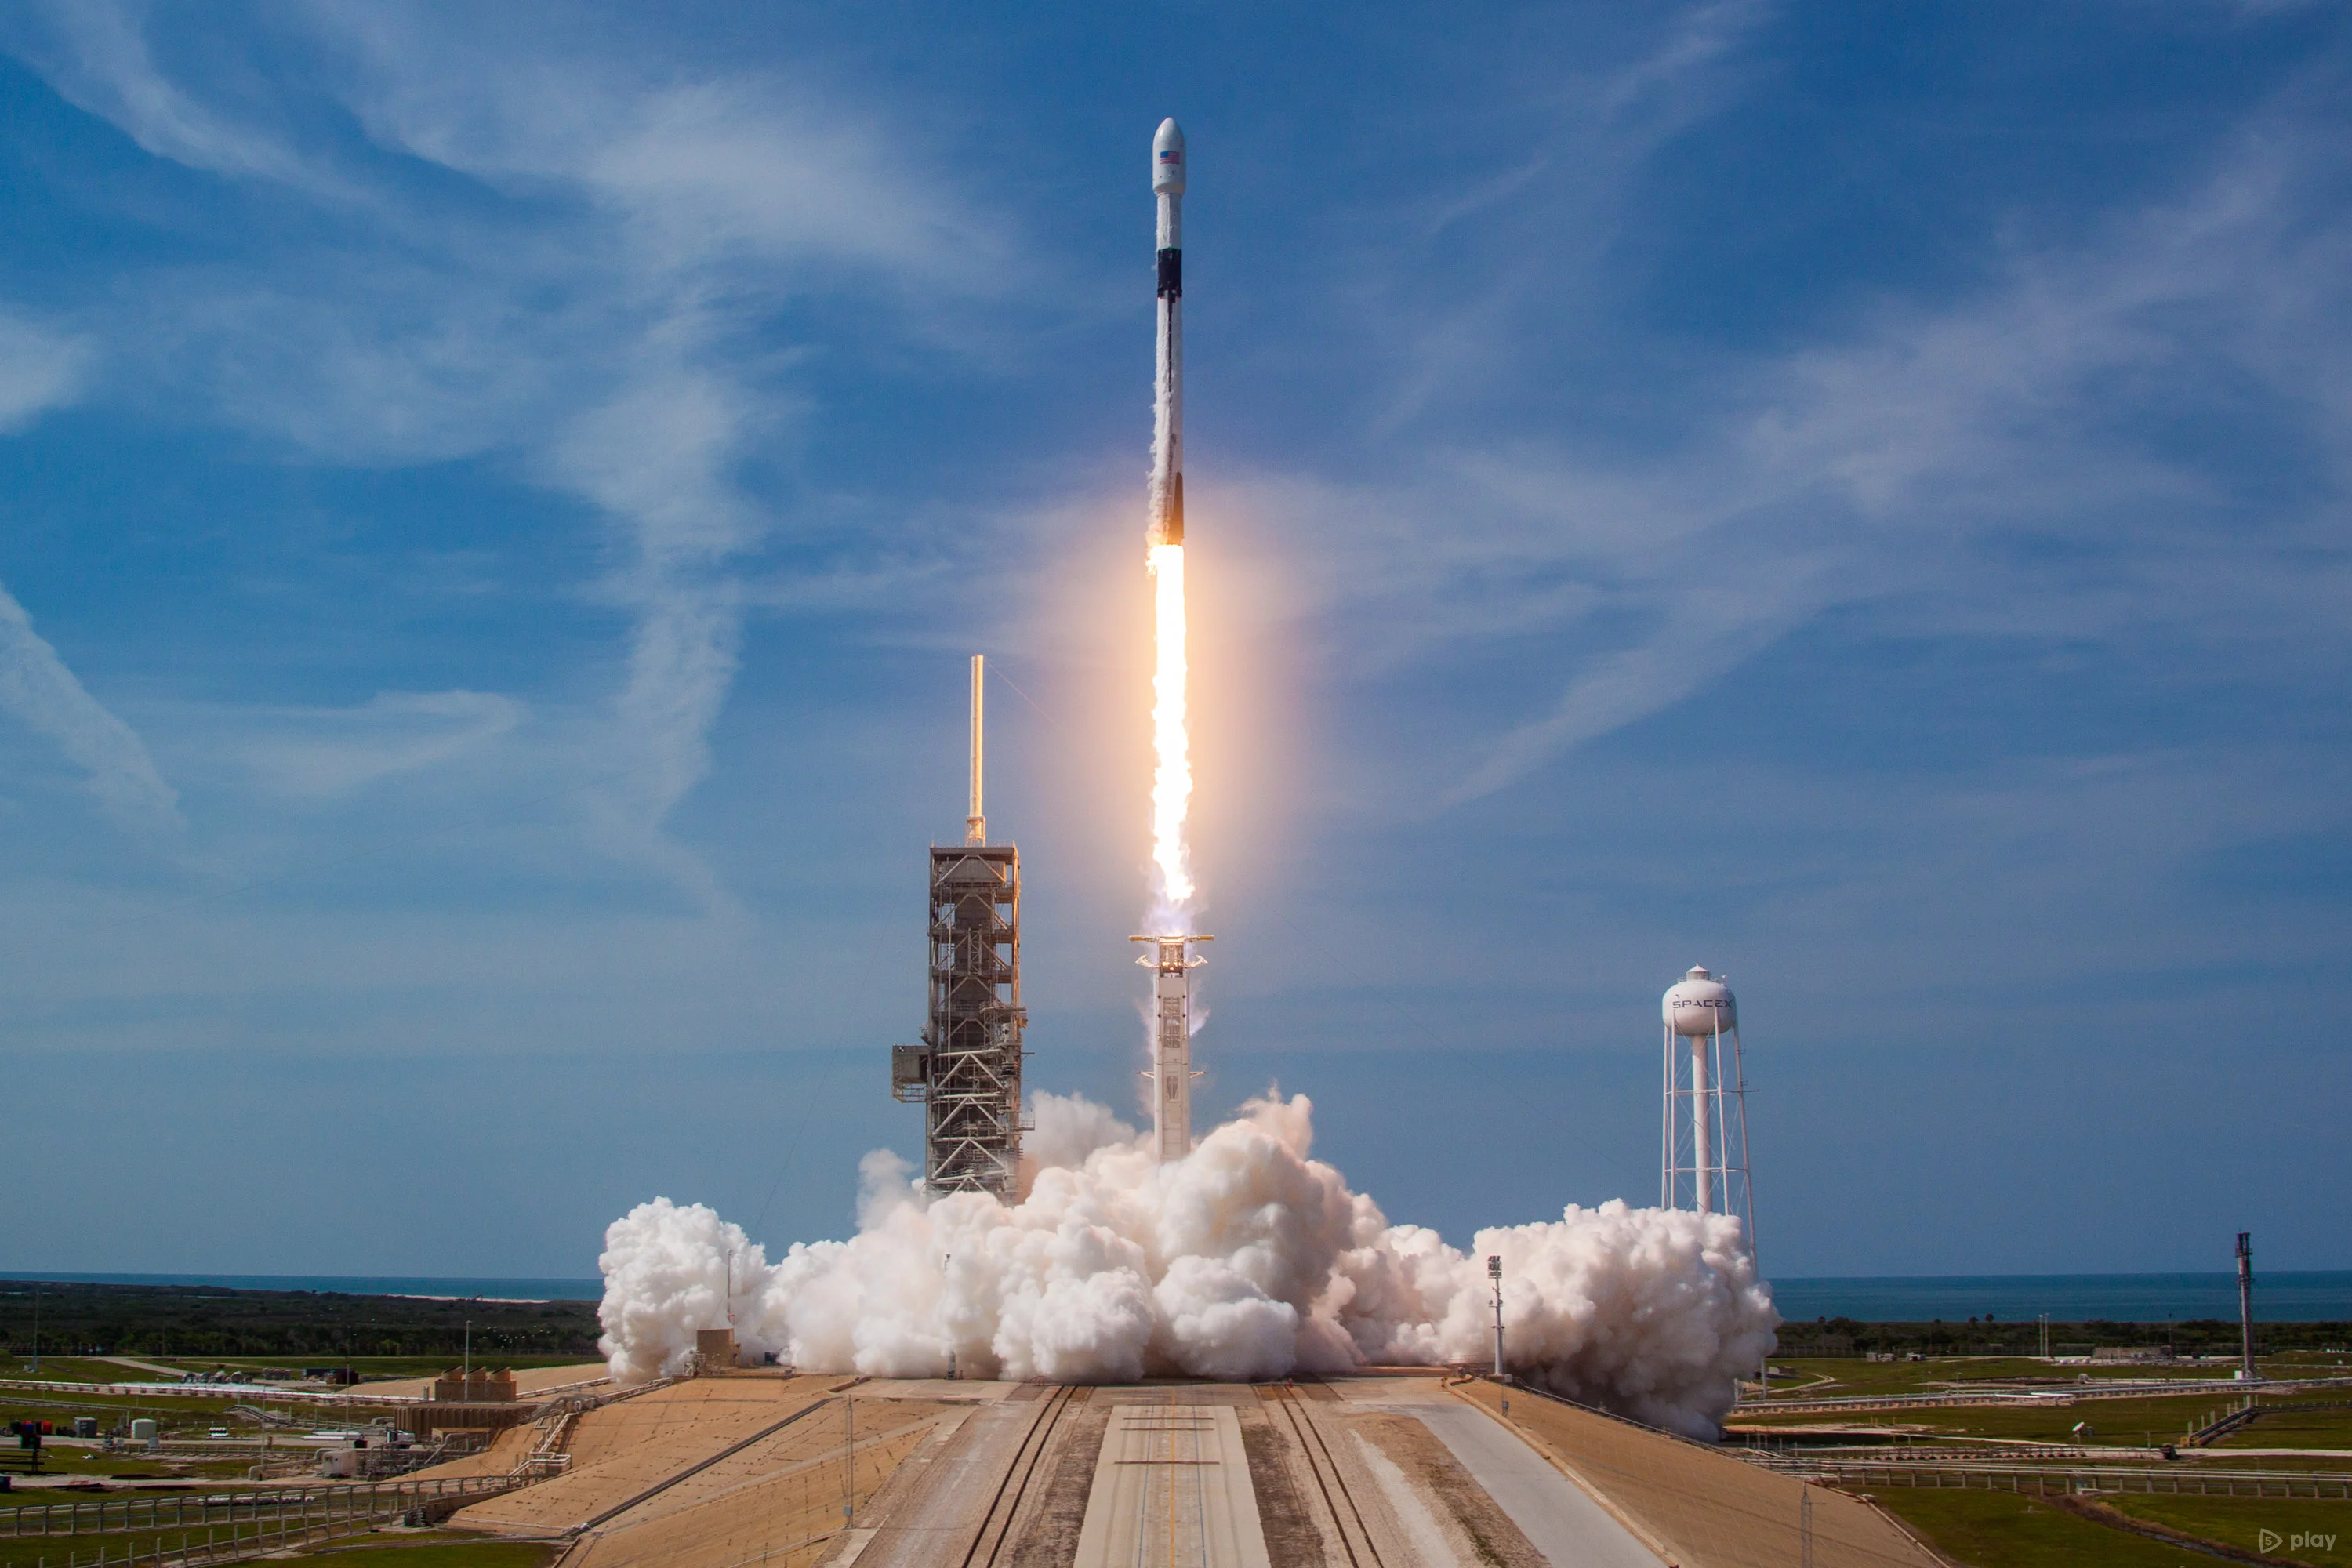 SpaceX aims for 52 launches in 2022